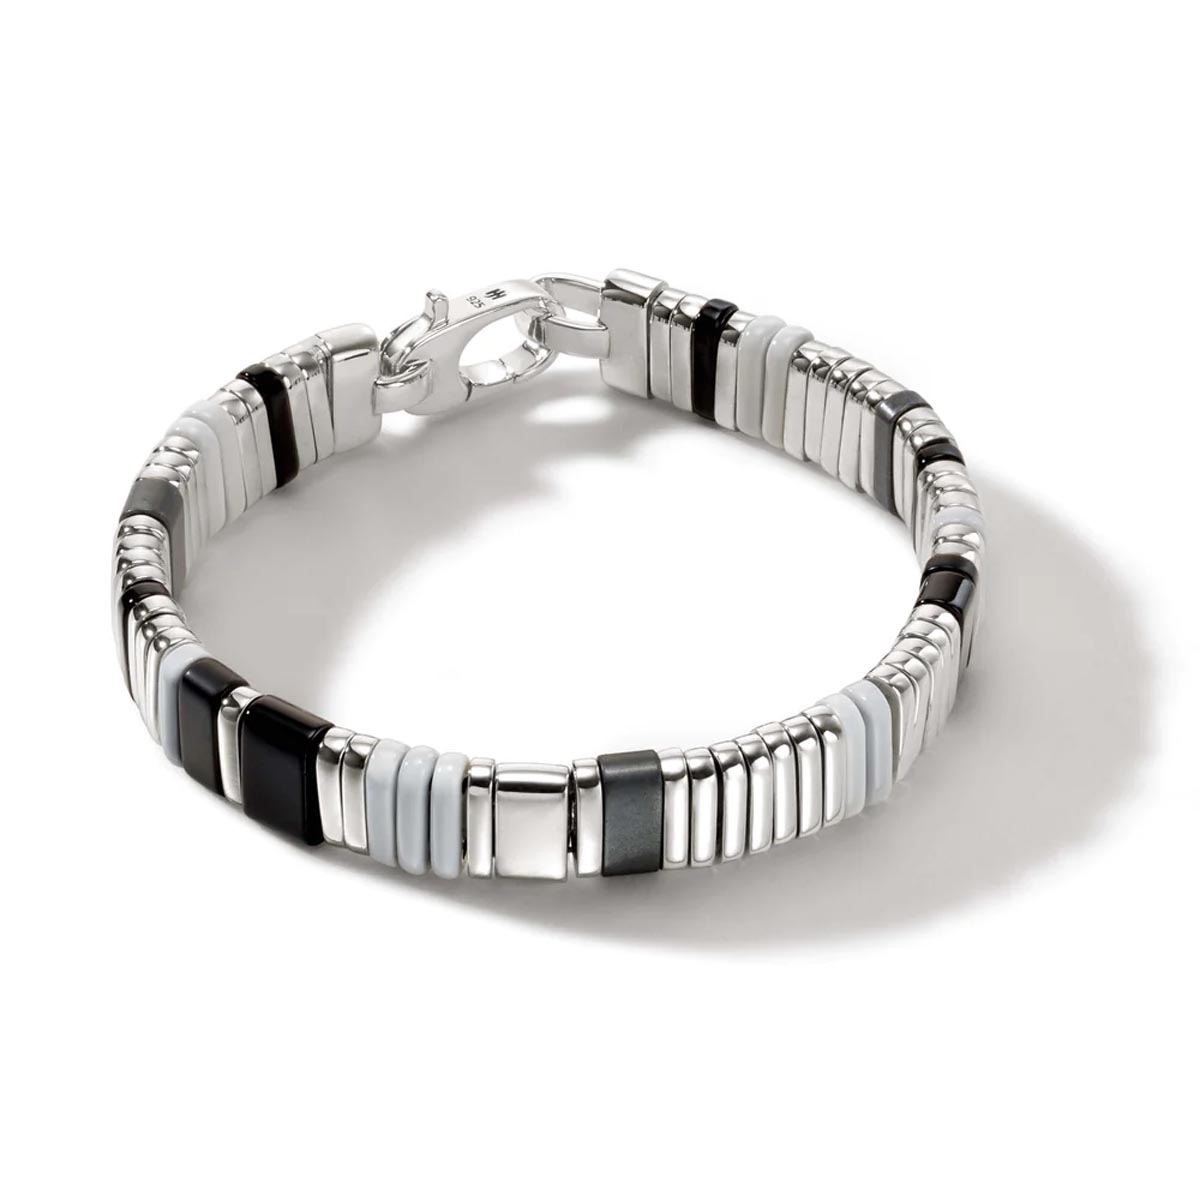 John Hardy Colorblock Collection Hematite and Black Onyx Bead Bracelet in Sterling Silver with White Enamel